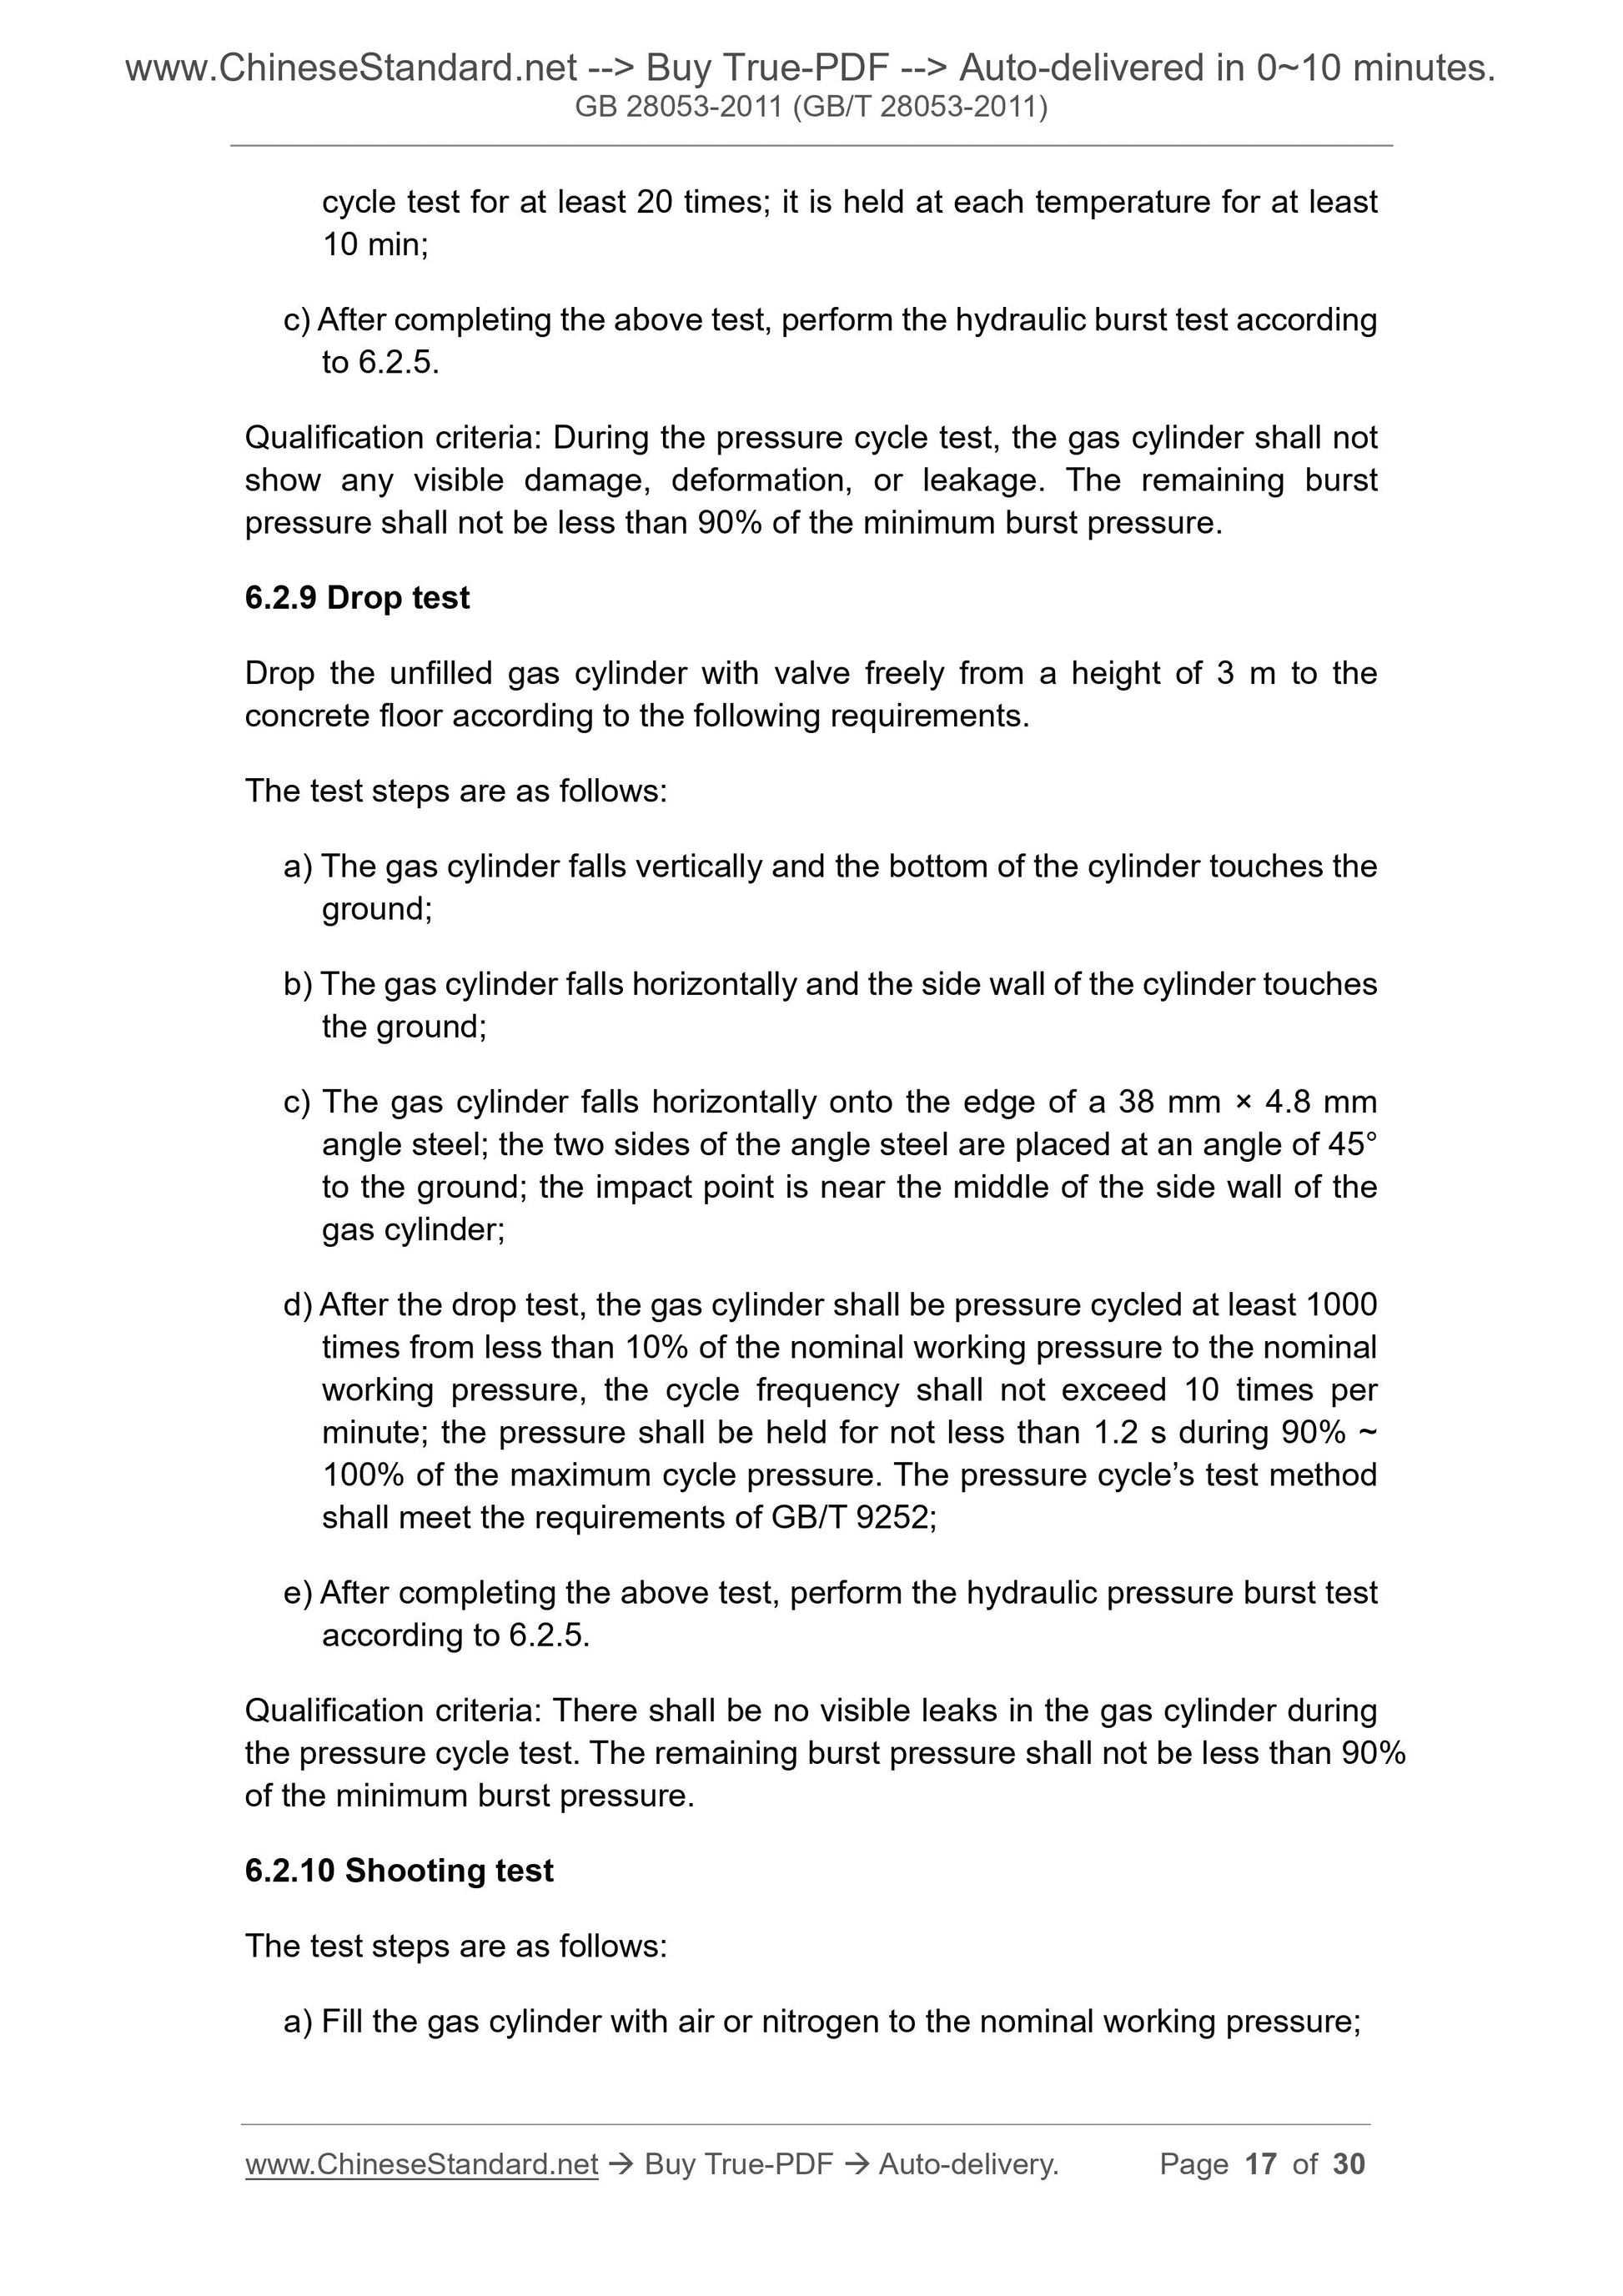 GB 28053-2011 Page 9